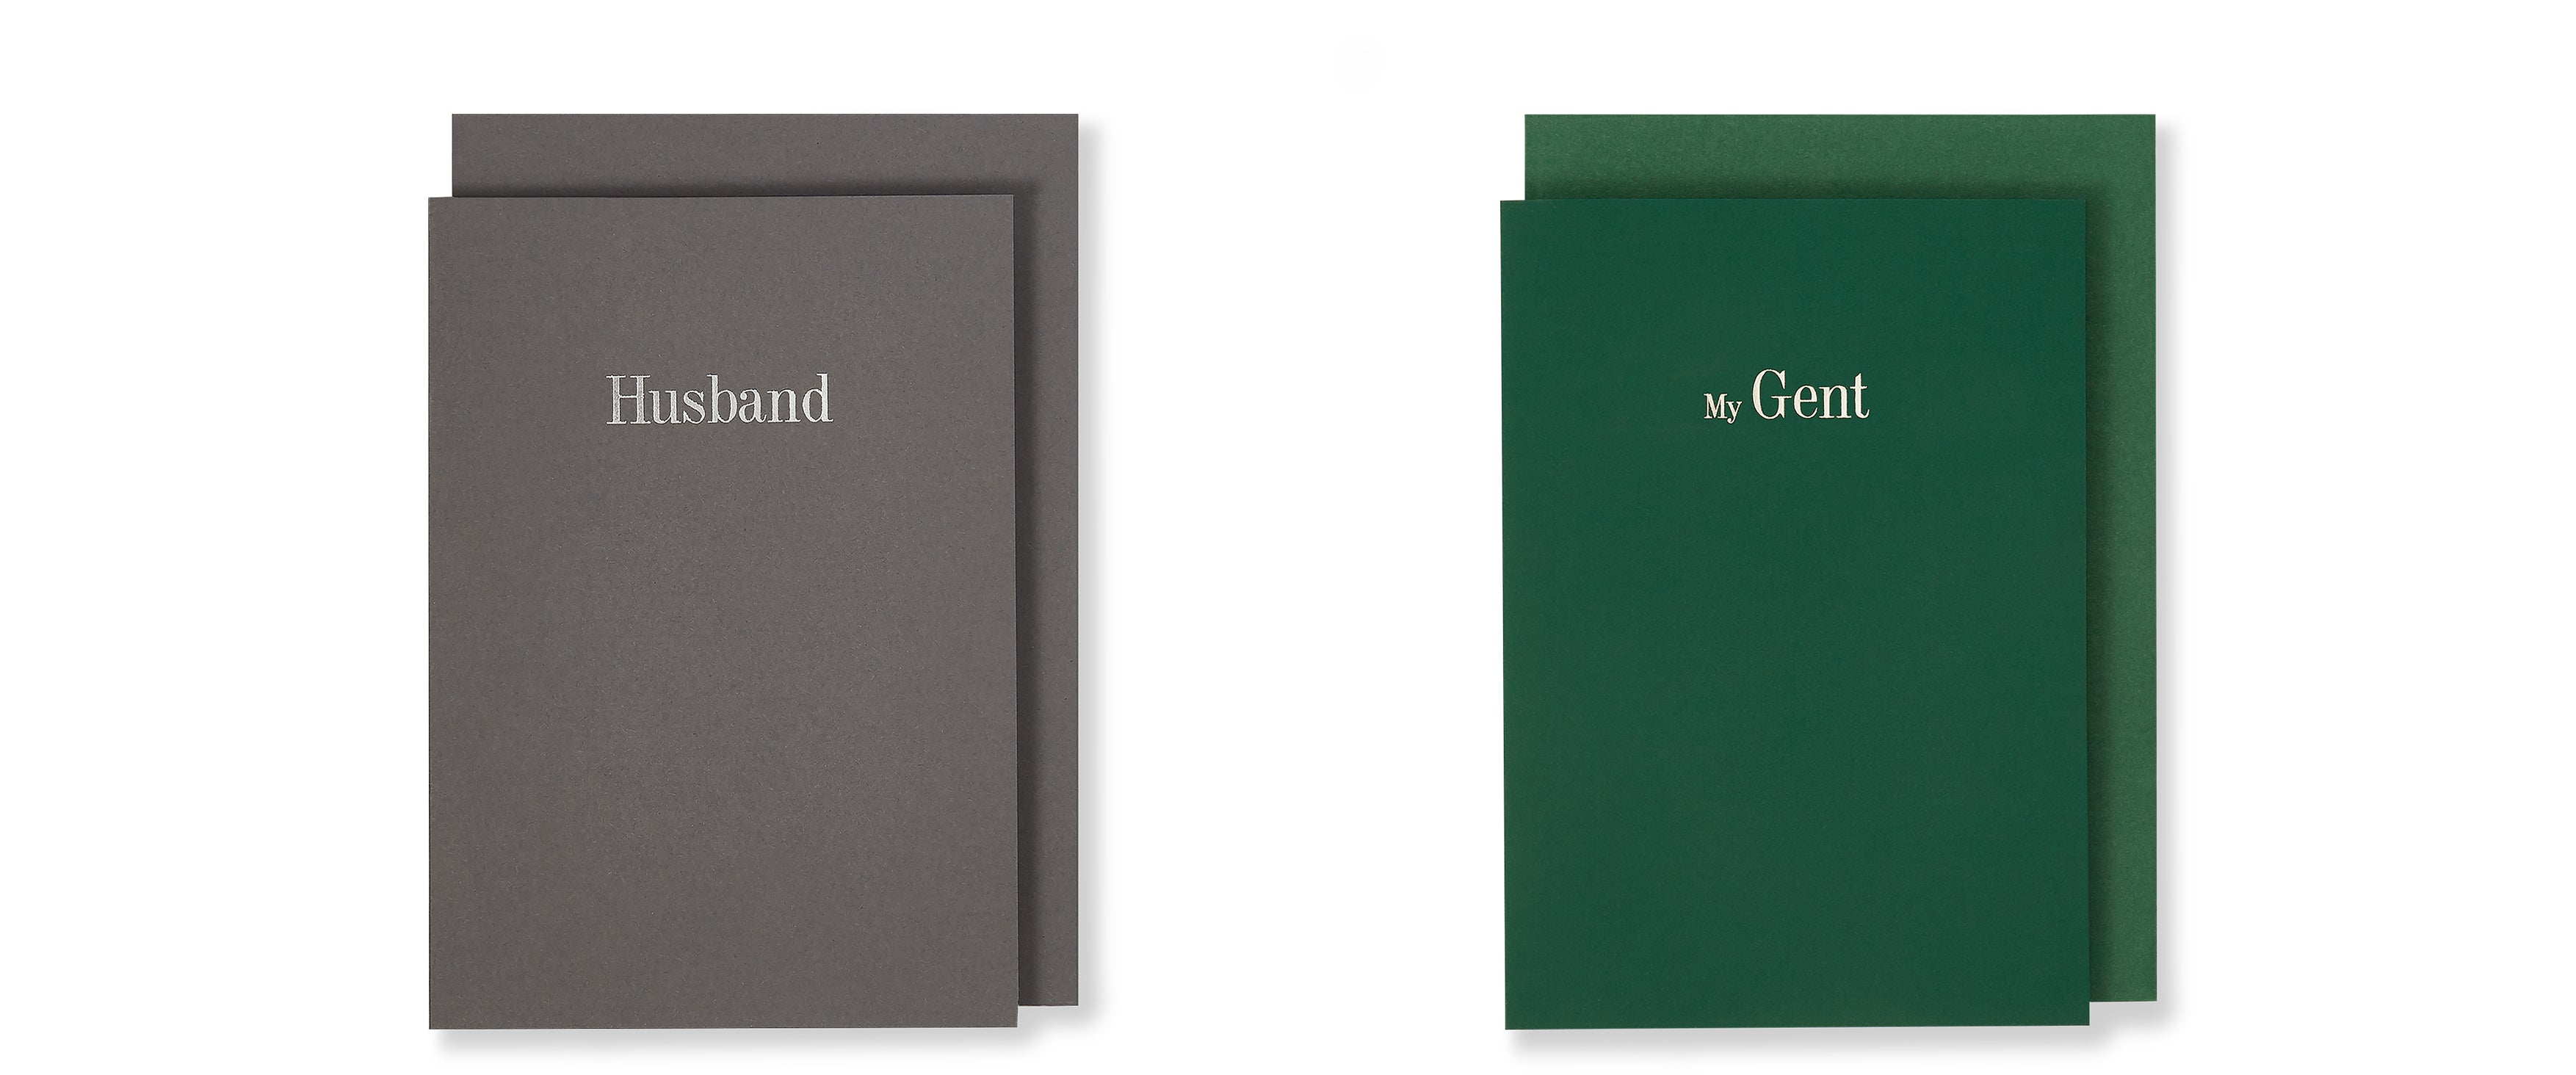 Husband and Gent, Father's Day Cards - Story of Elegance